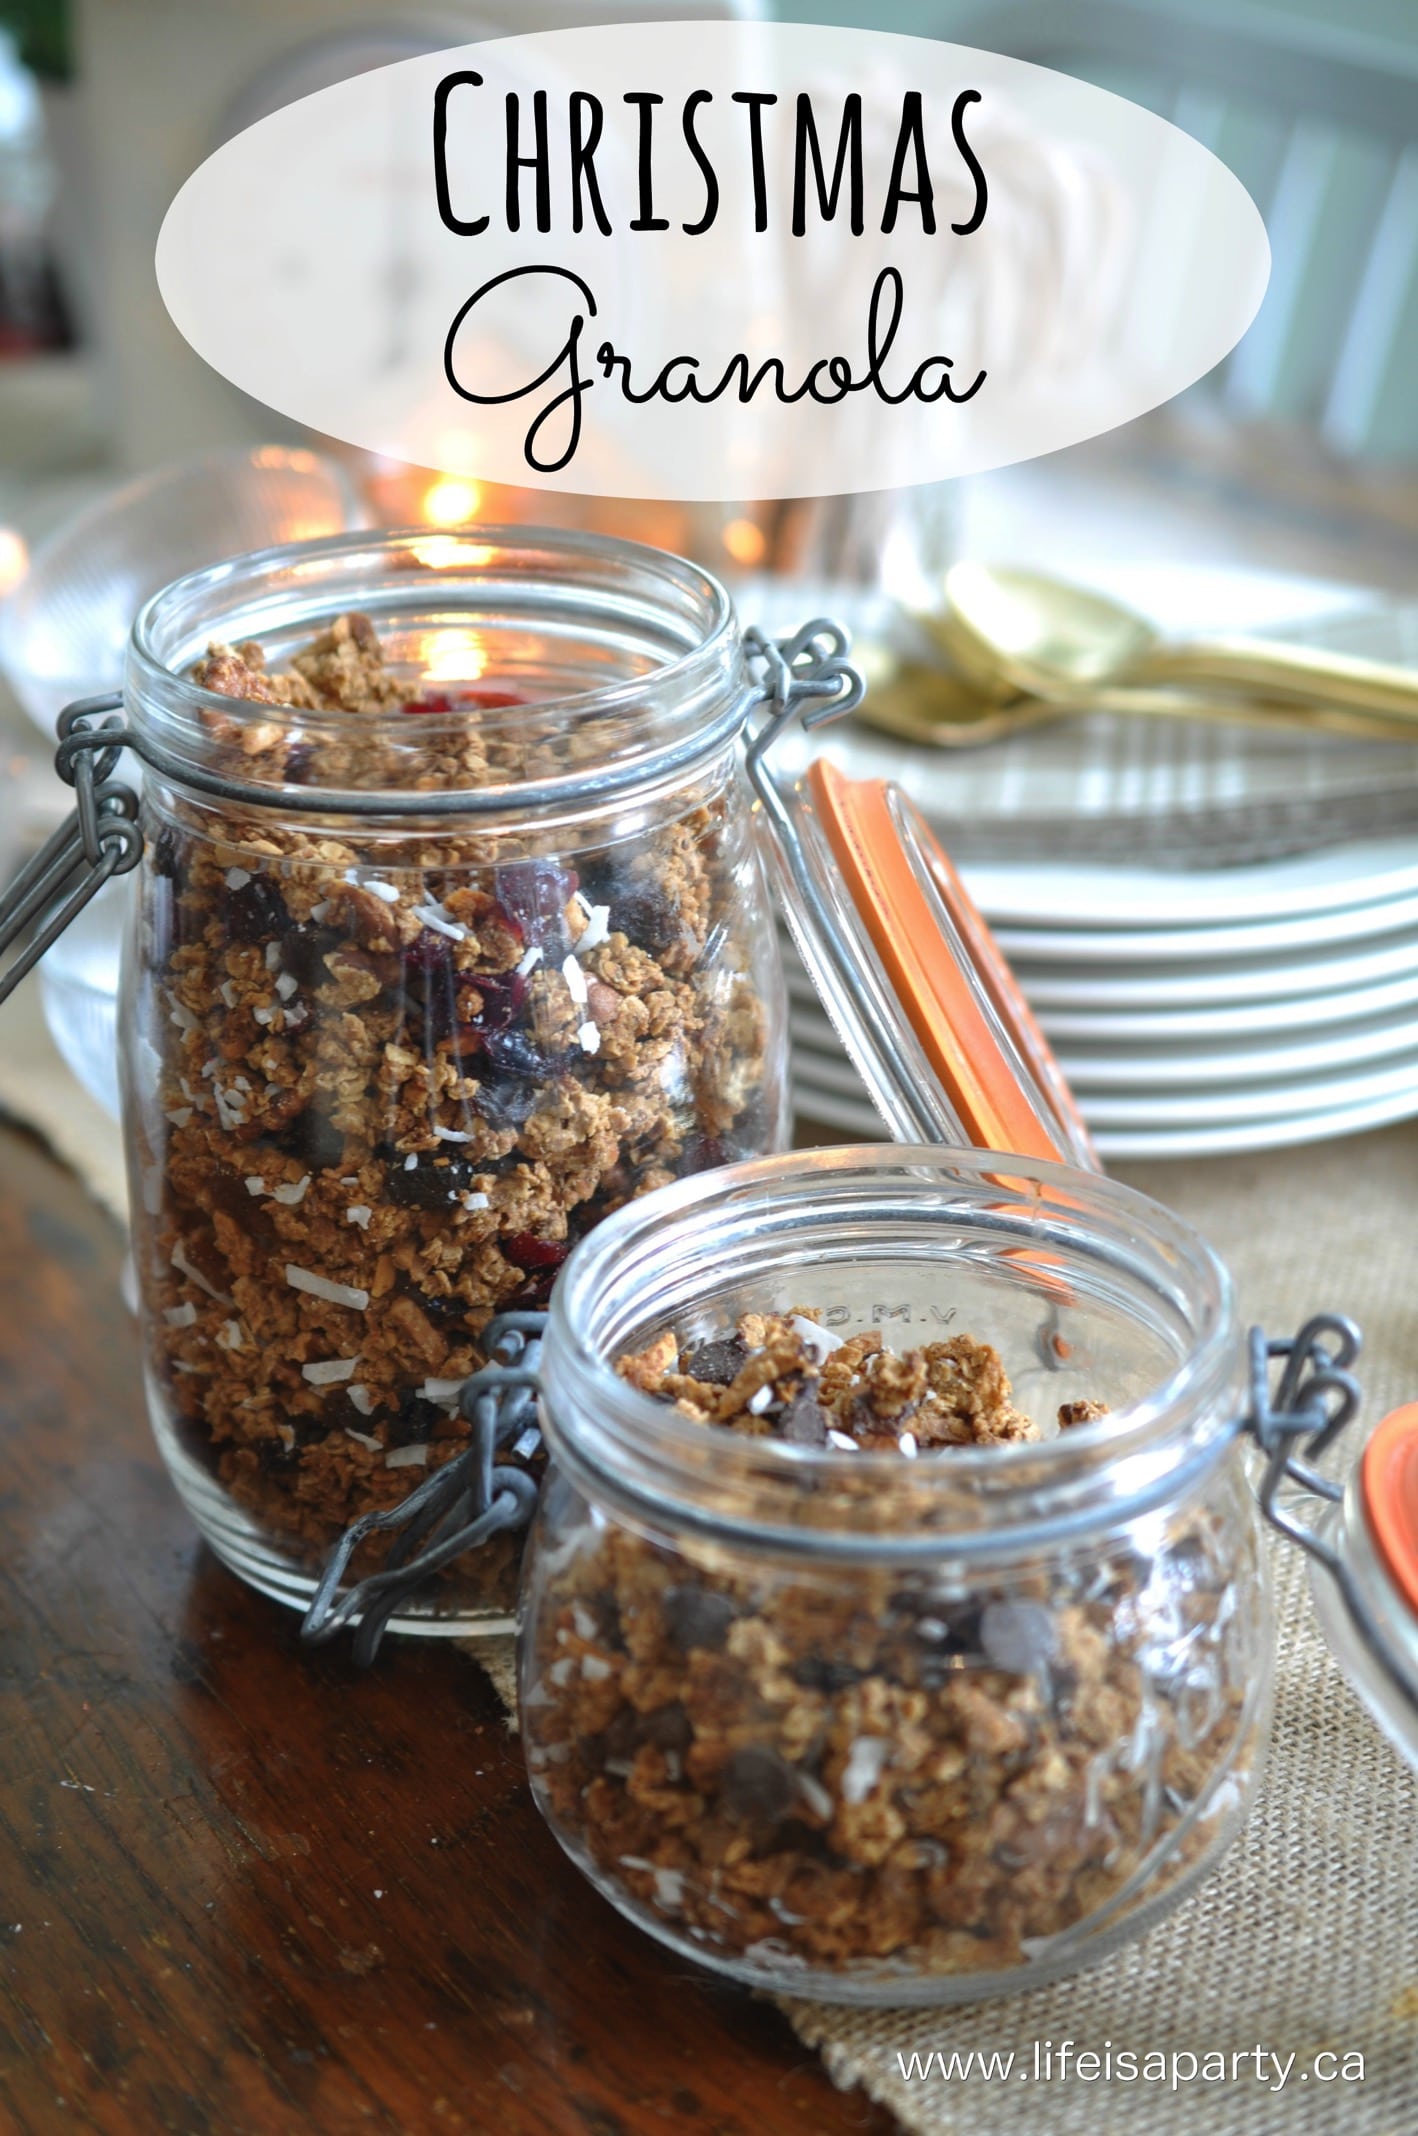 Homemade Christmas Granola -the perfect gift for Christmas: make cranberry and mixed fruits and nuts granola , or chocolate chip and coconut granola for the holidays.